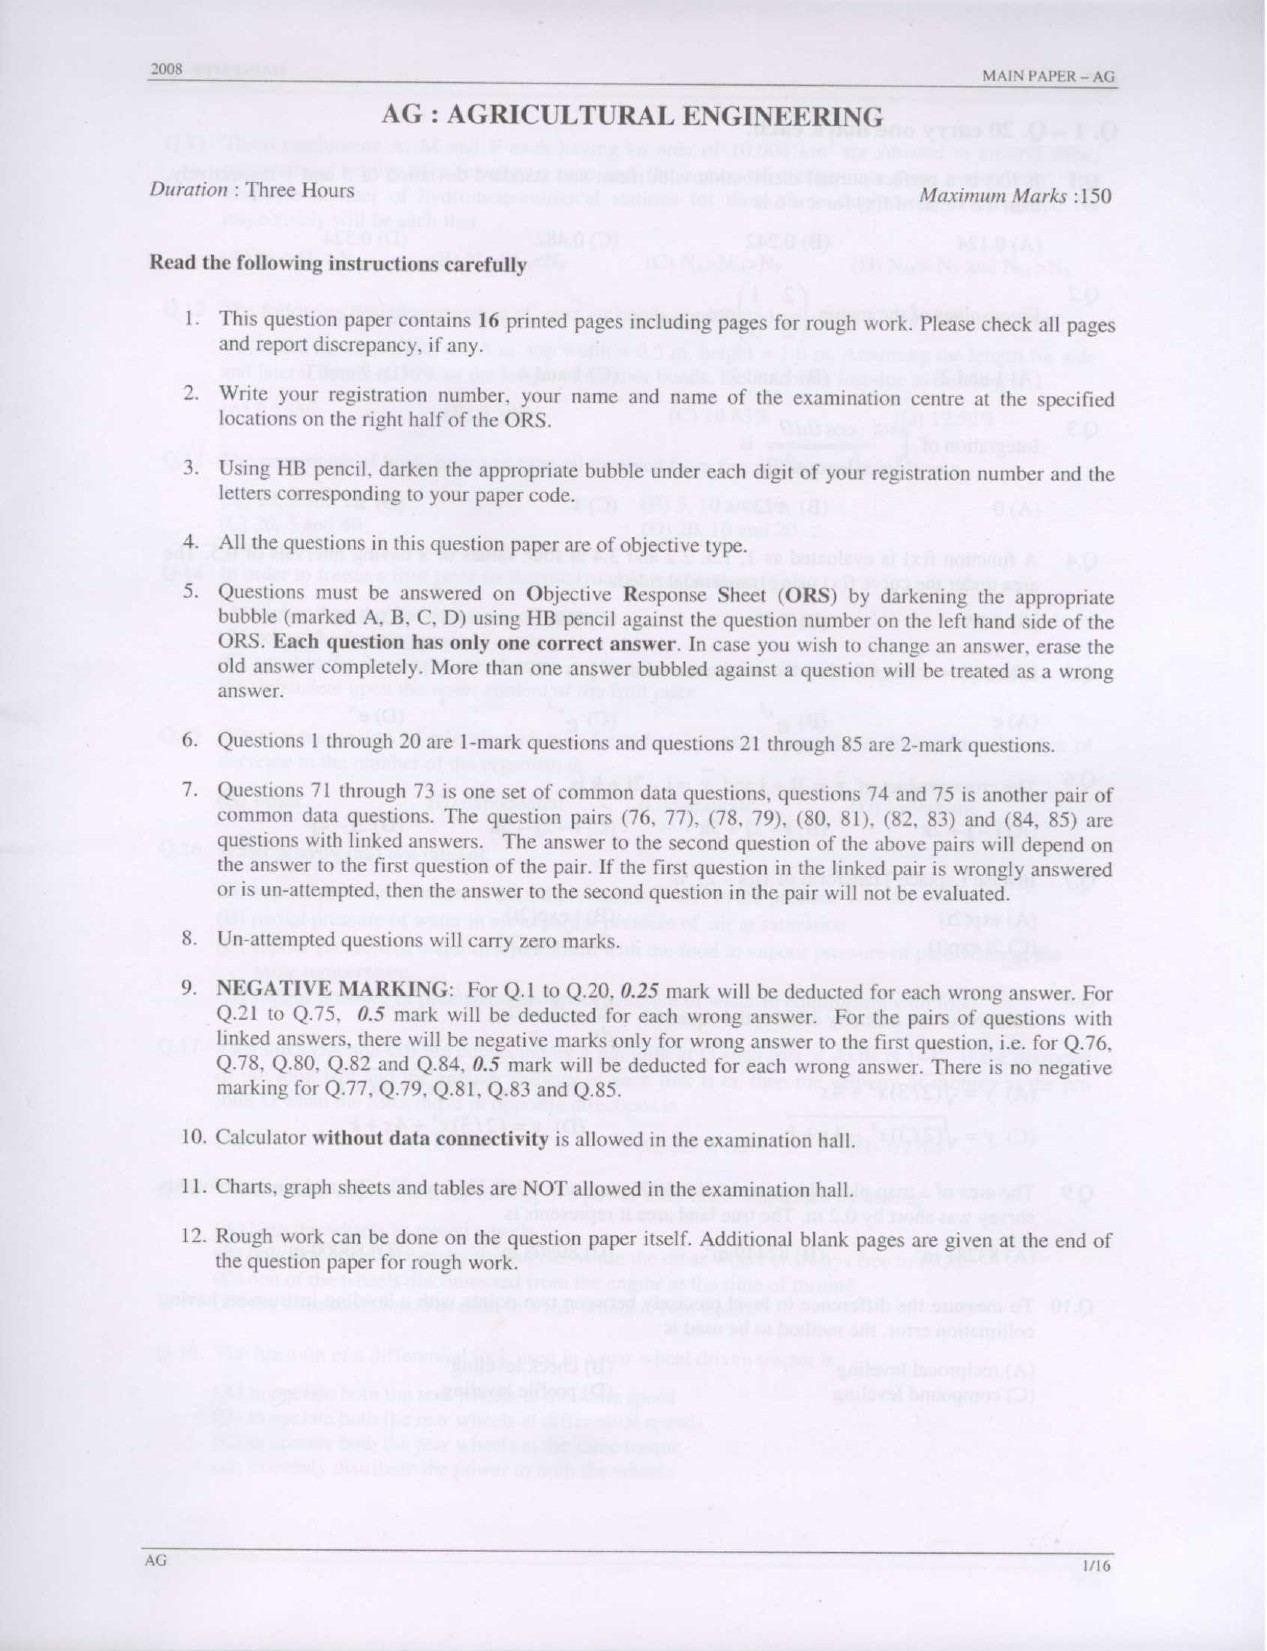 GATE Exam Question Paper 2008 Agricultural Engineering 1